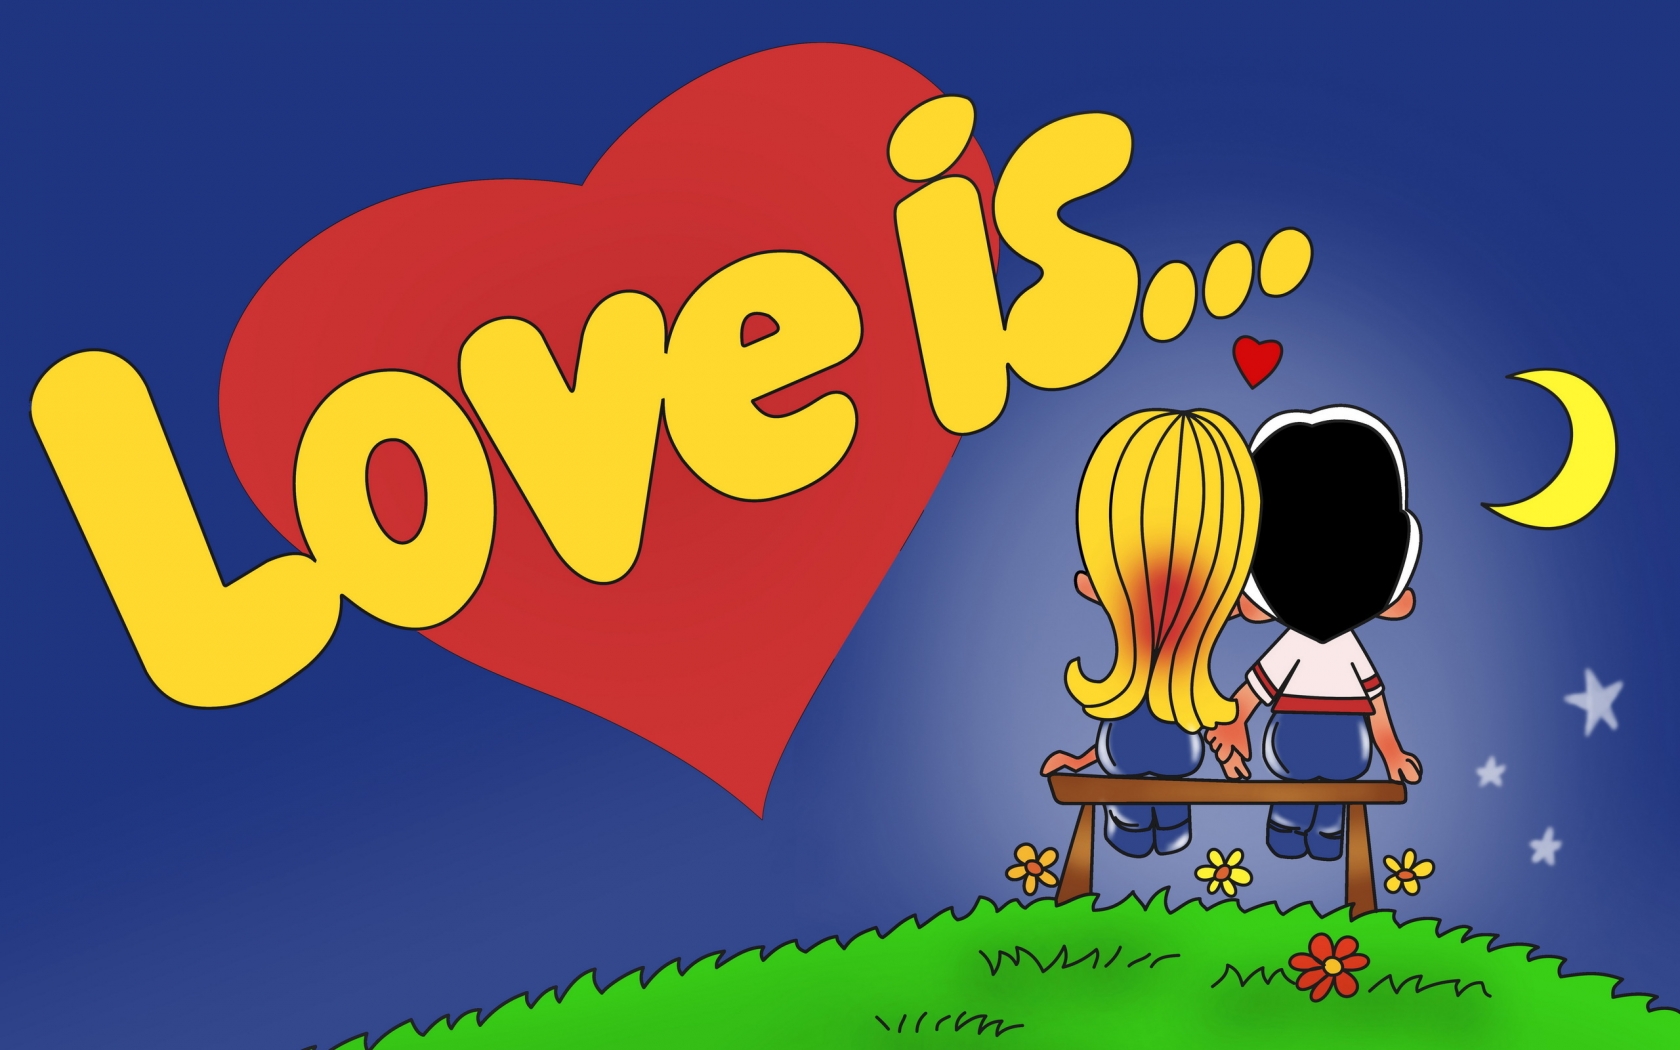 Love is for 1680 x 1050 widescreen resolution